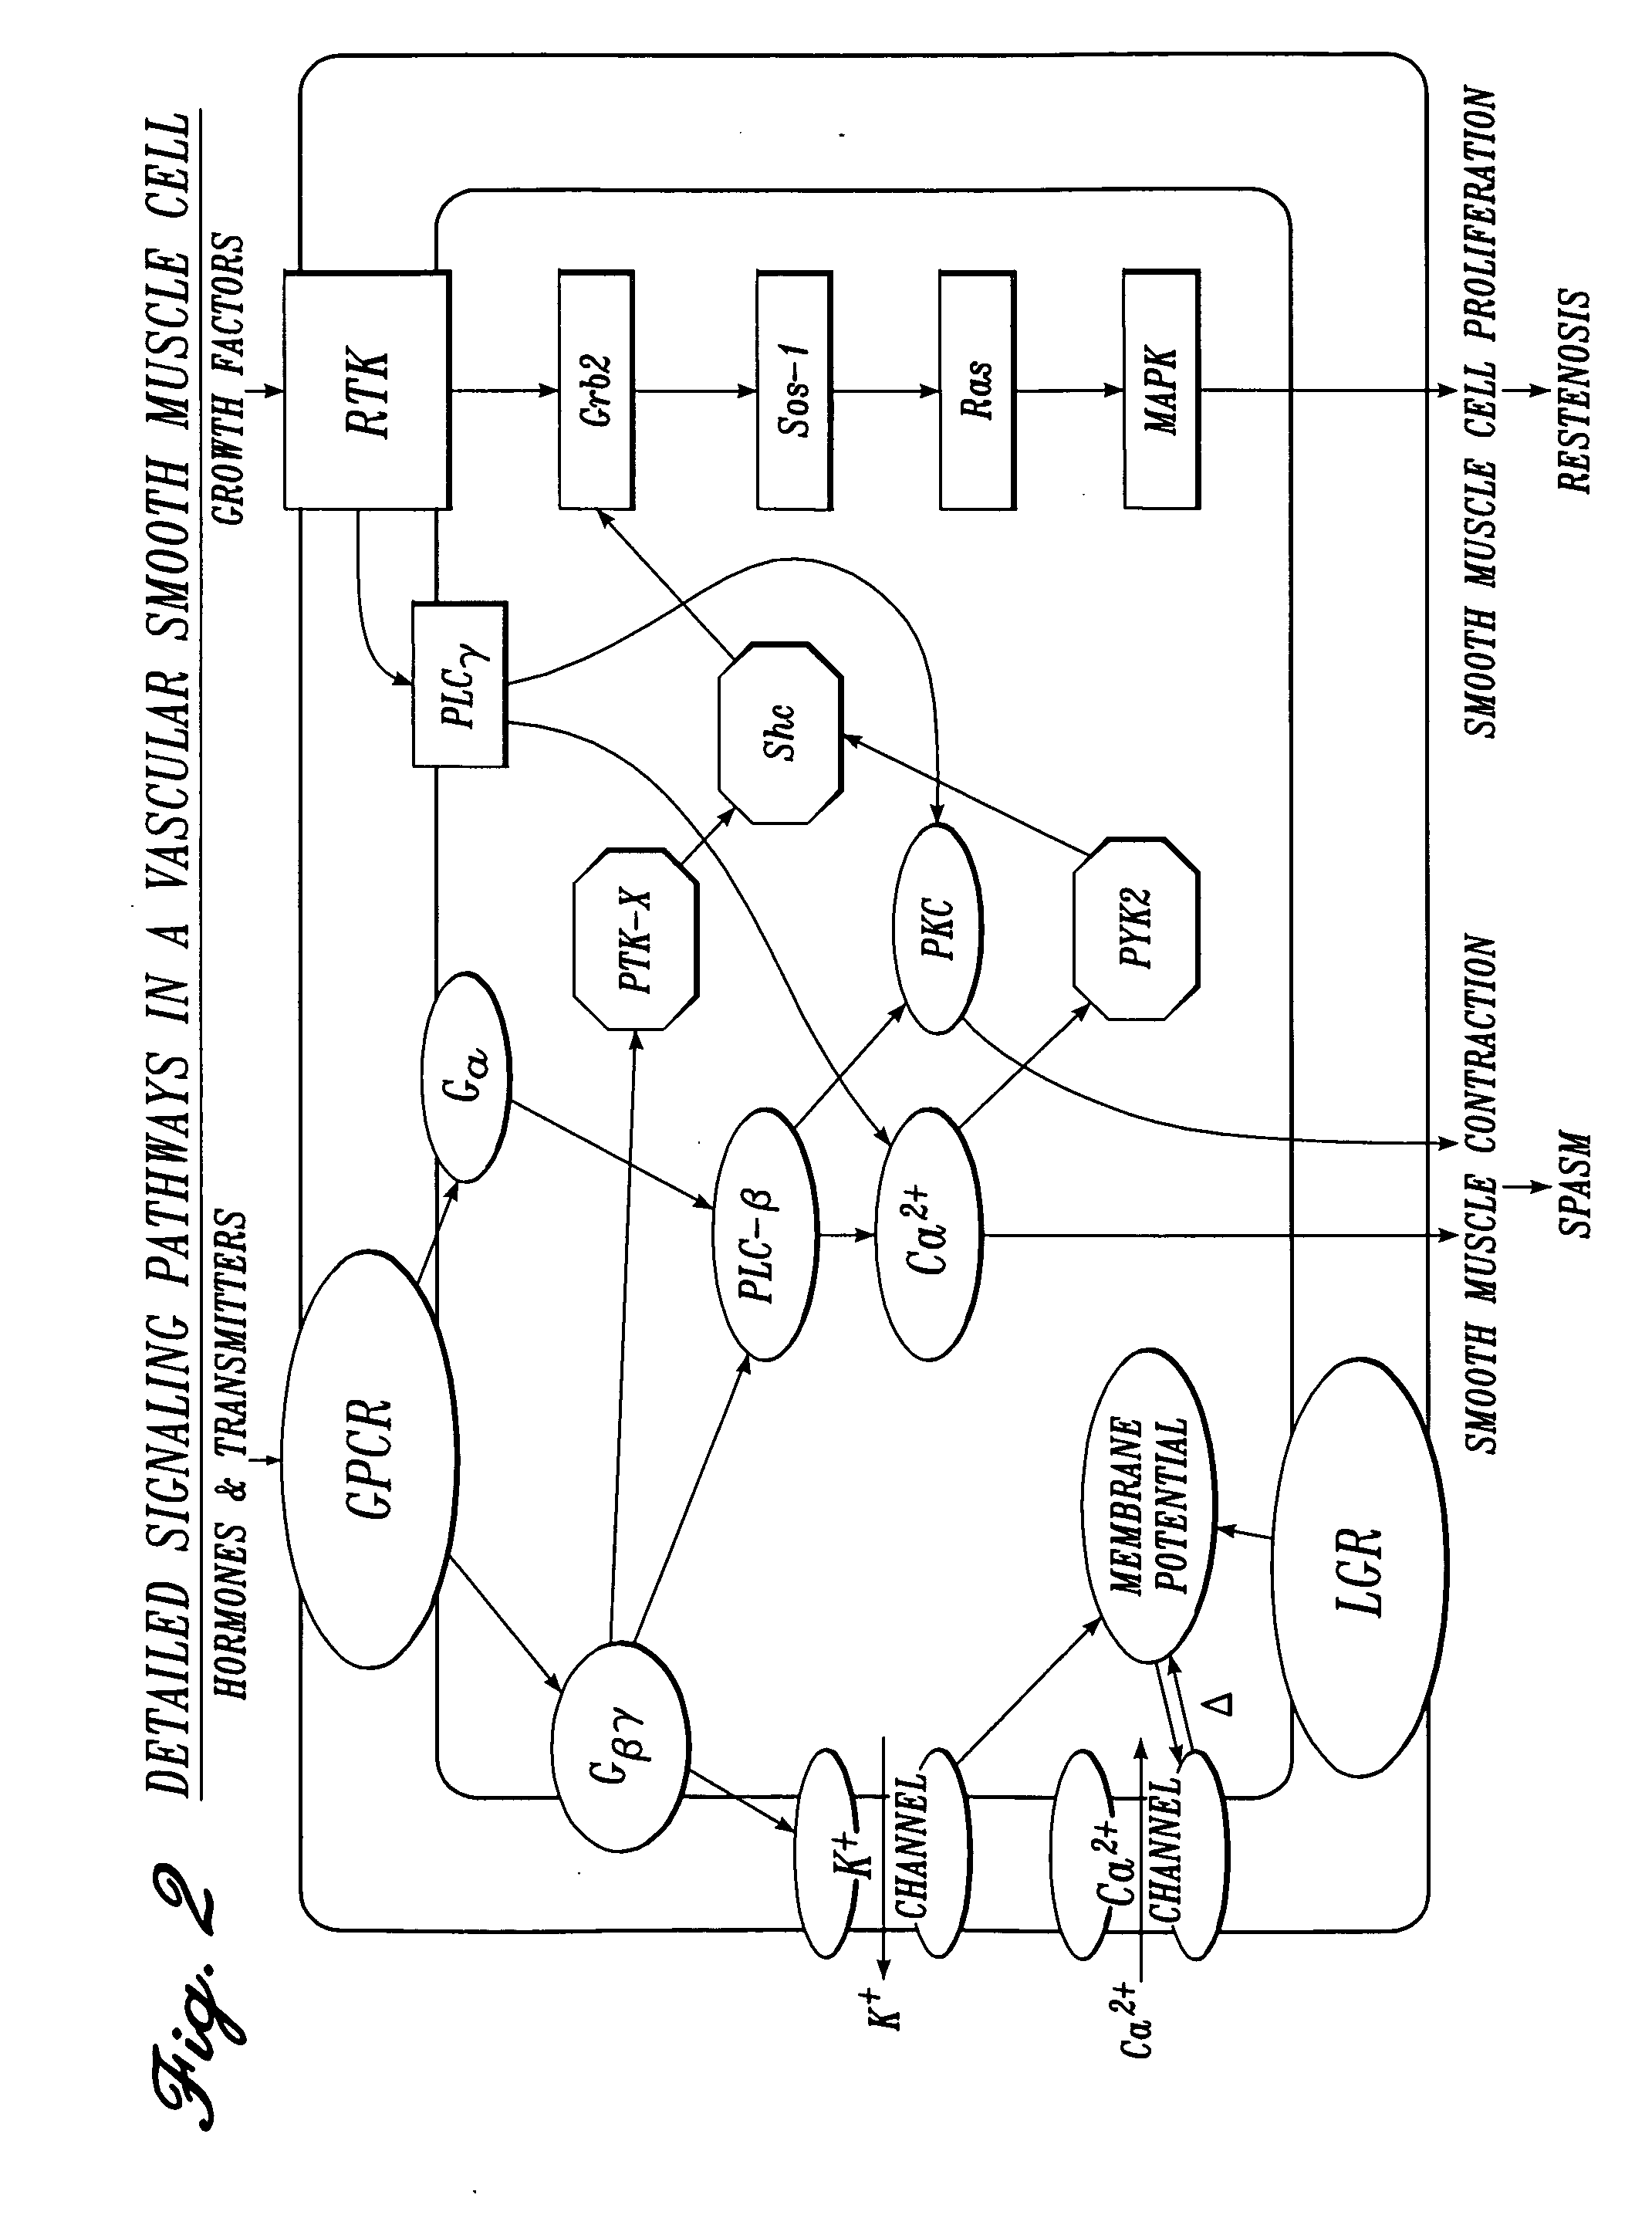 Irrigation solution and method for inhibition of pain and inflammation